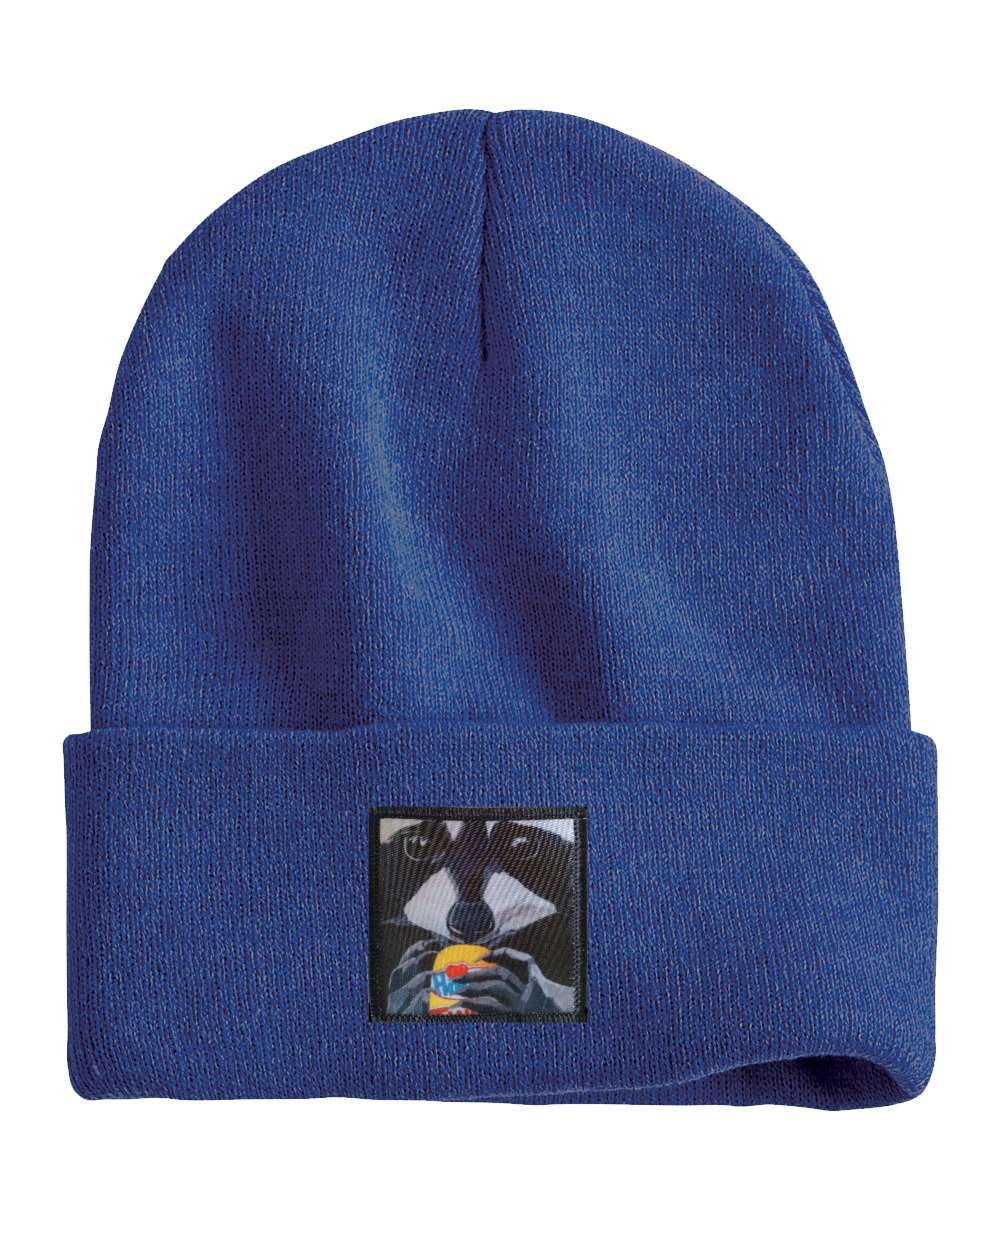 The Snack Kid Raccoon Beanie Hats Flyn Costello Heather Blue  